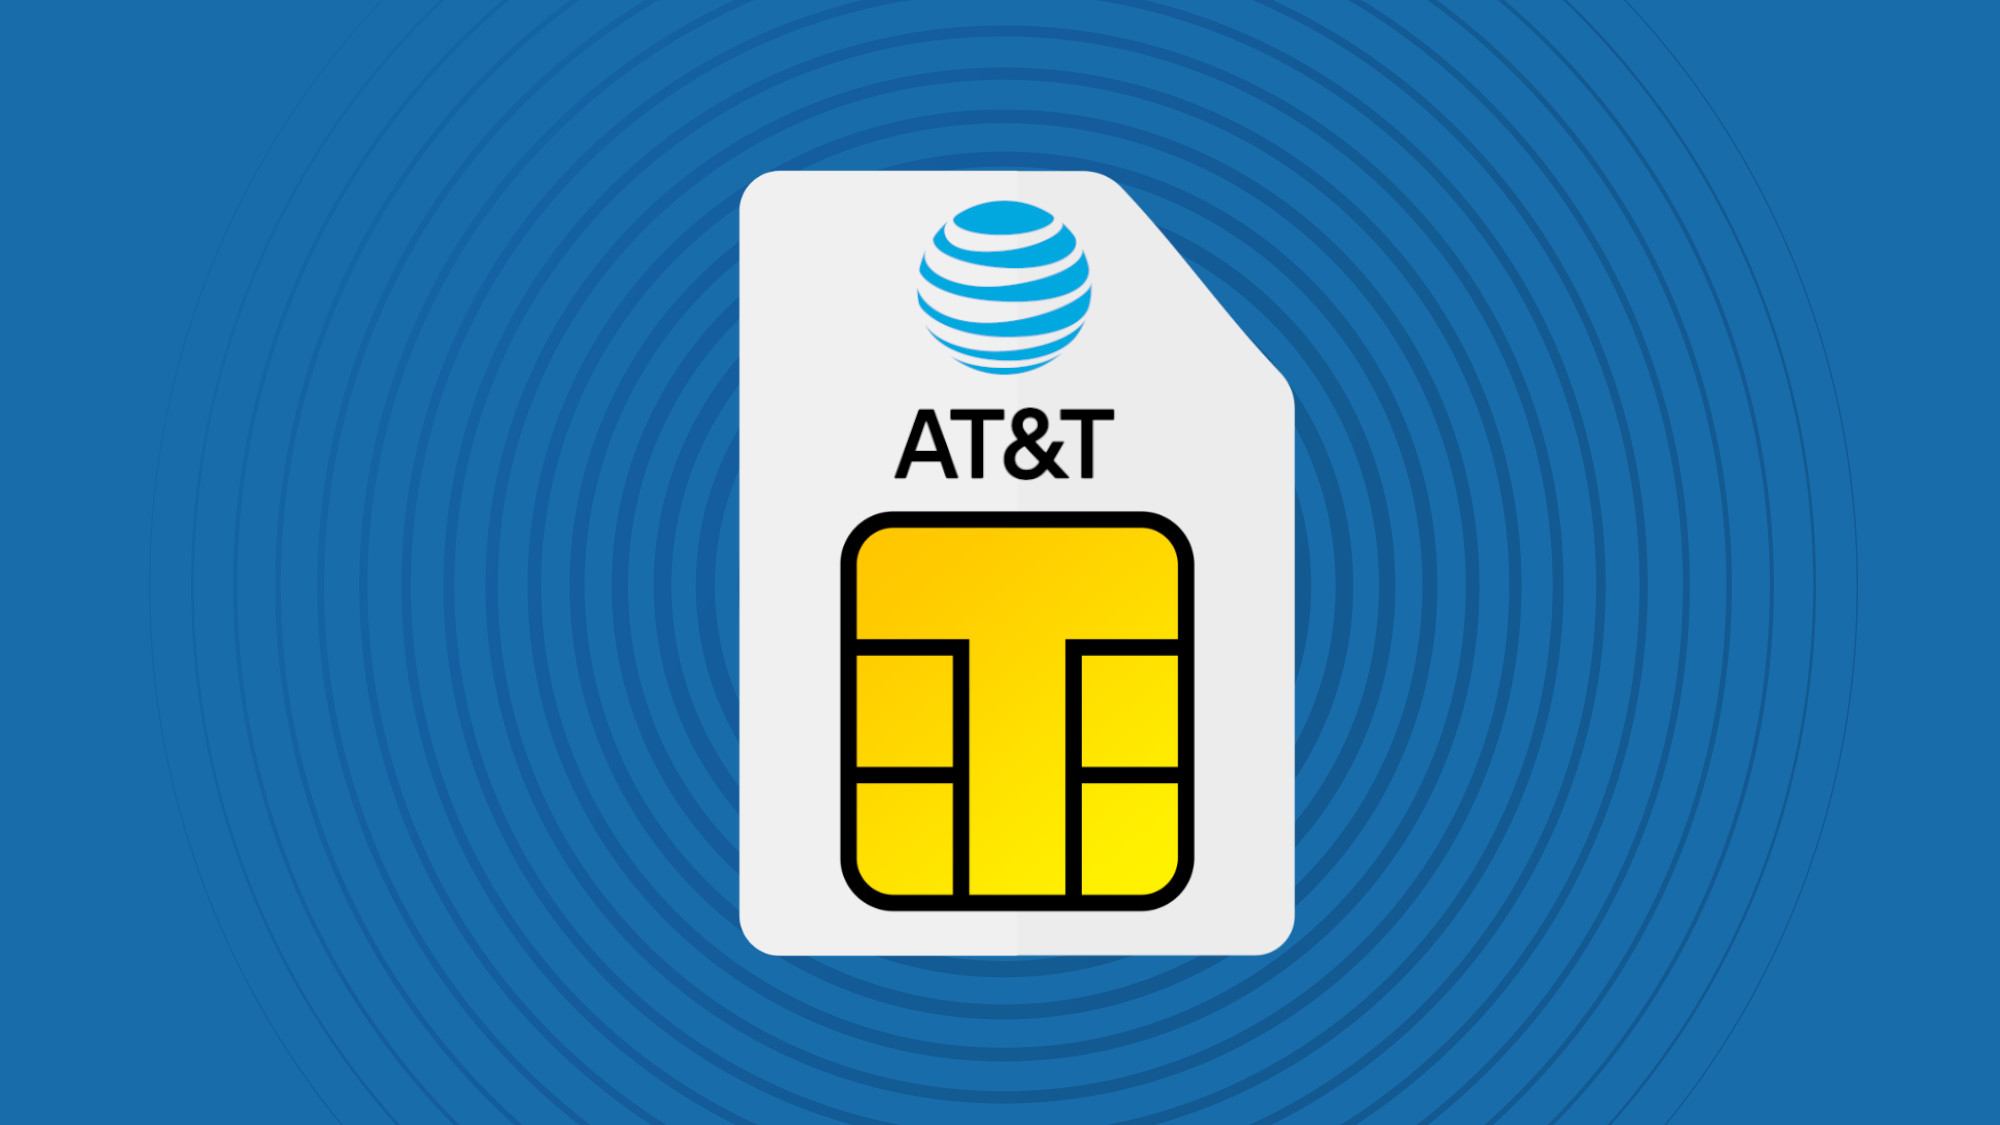 AT&T branded sim card on blue background